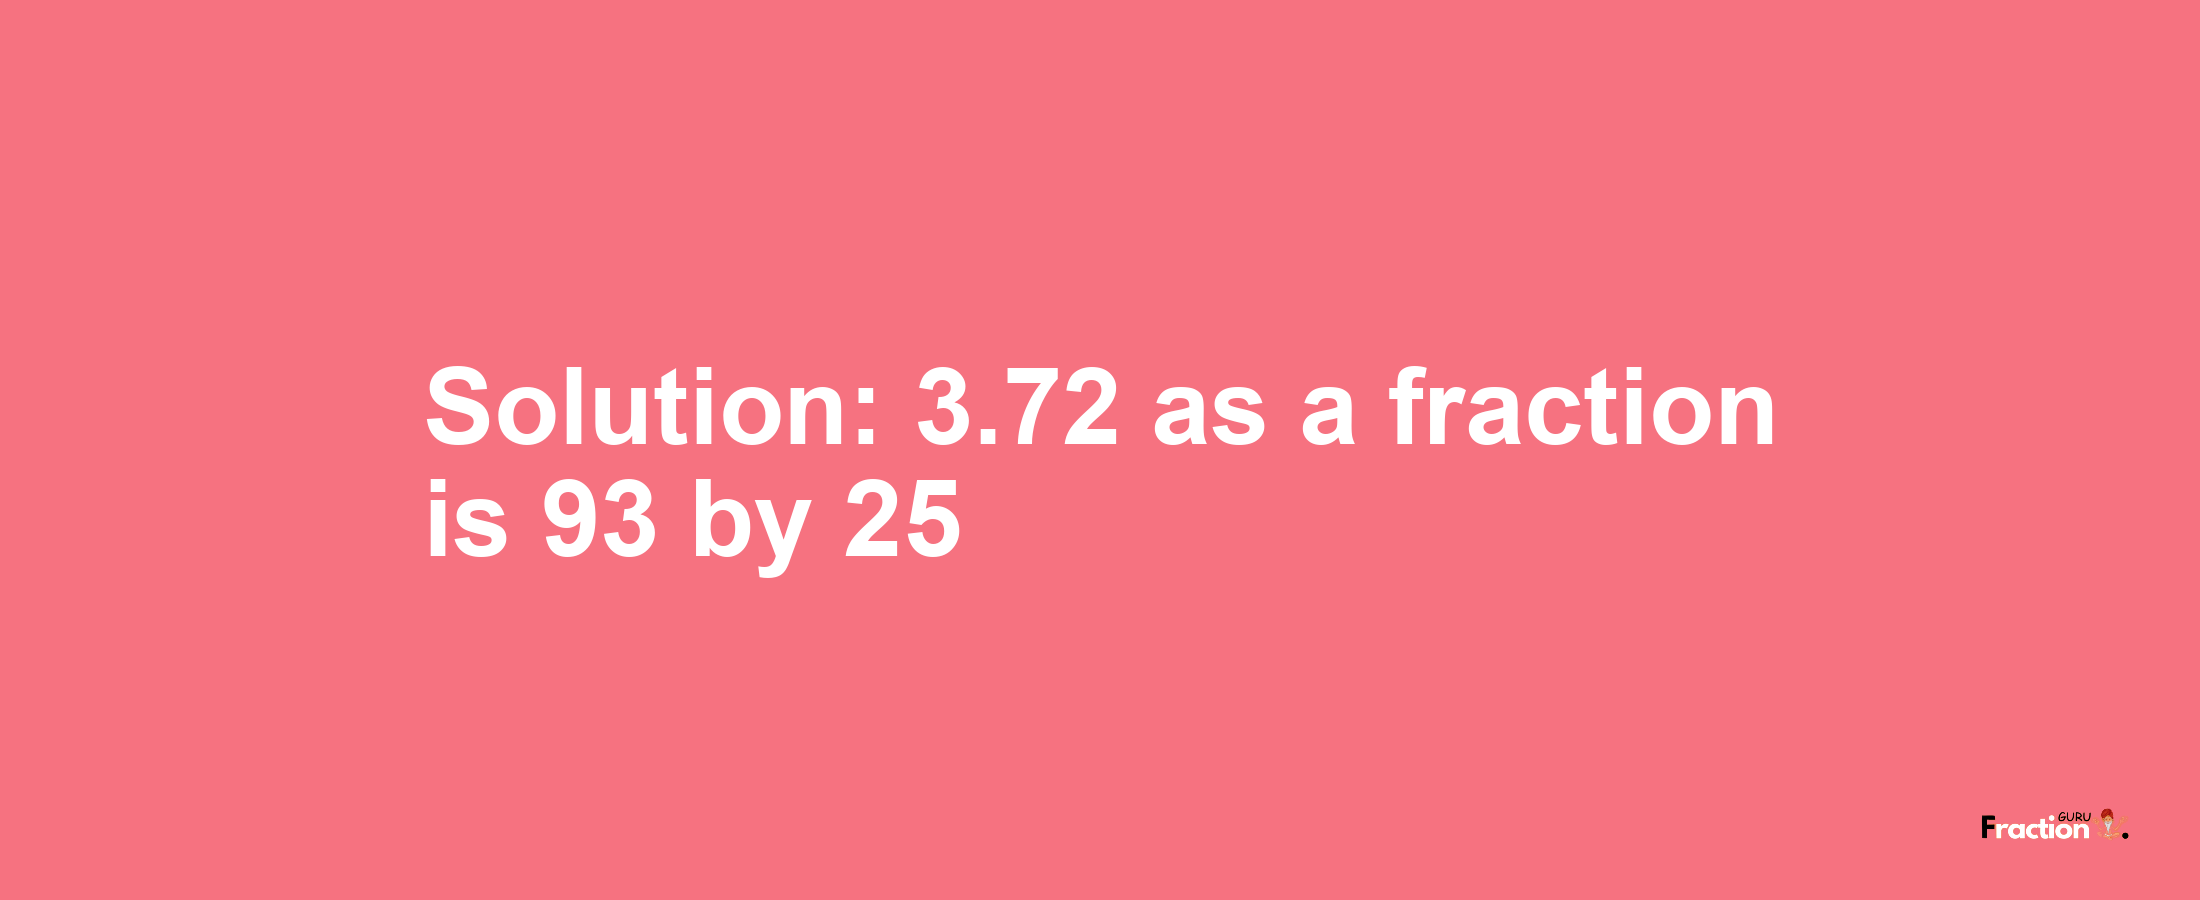 Solution:3.72 as a fraction is 93/25